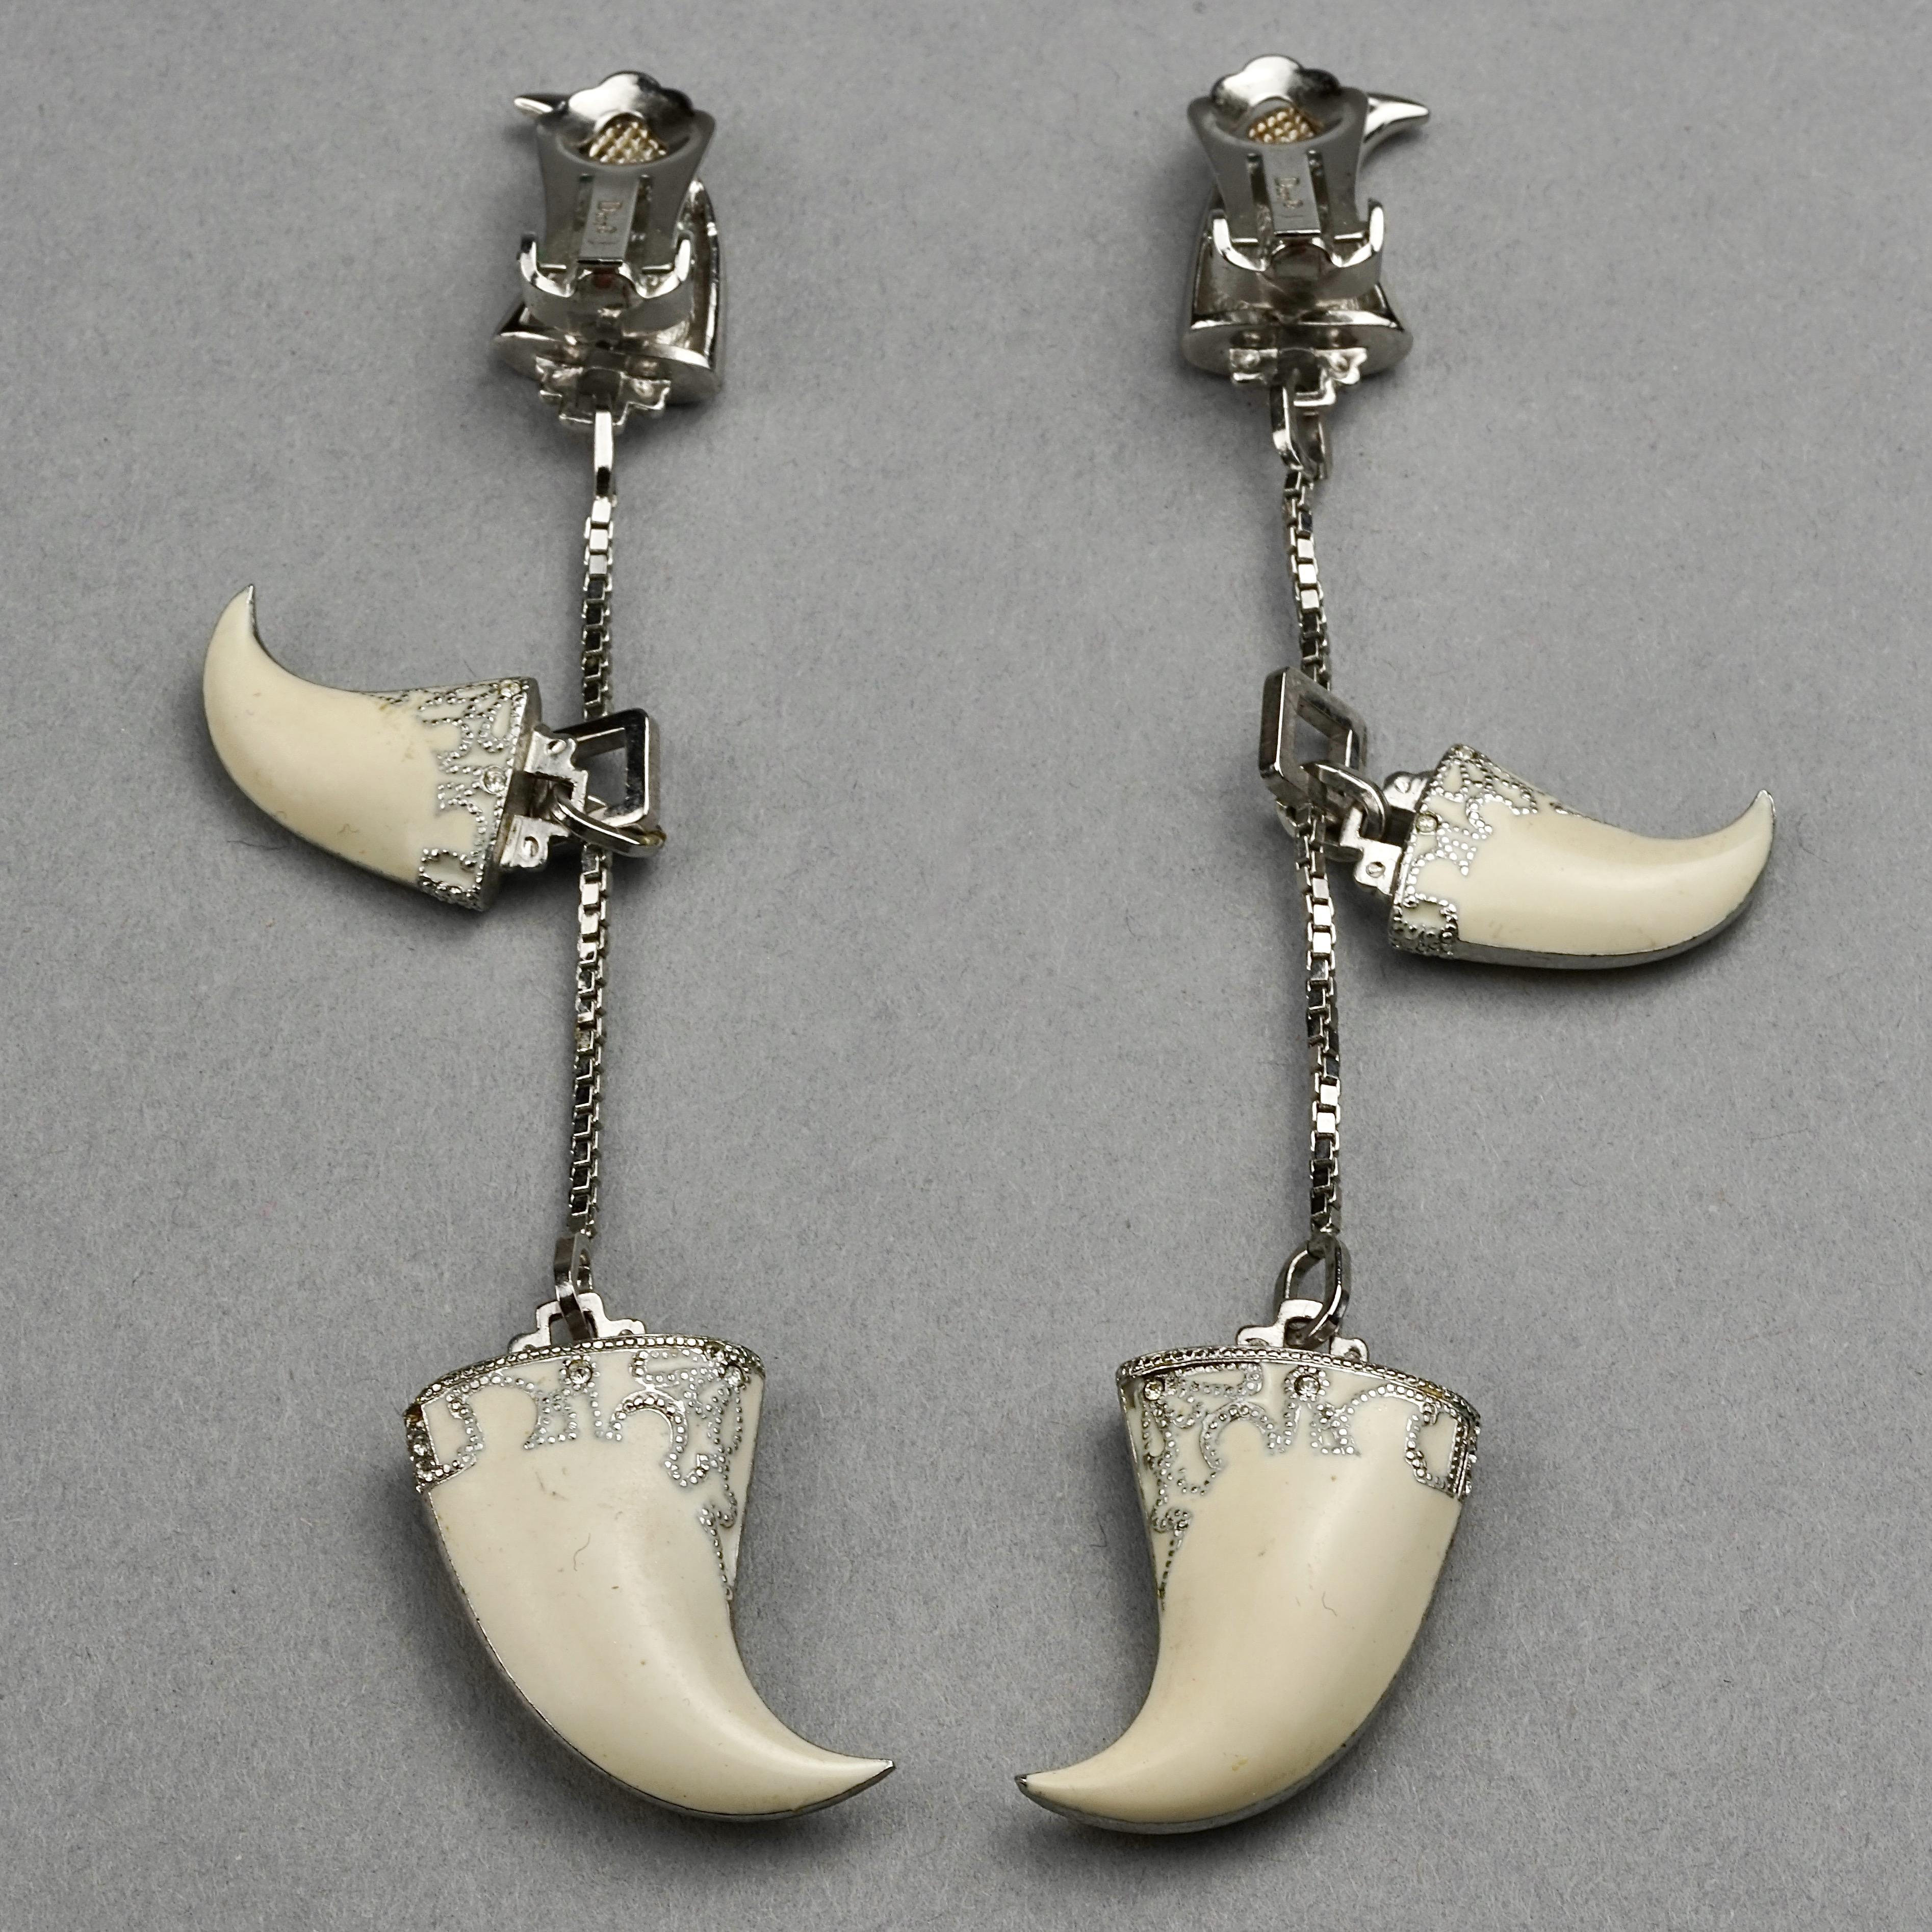 Vintage 2003 CHRISTIAN DIOR CLAW White Enamel Dangling Earrings by Galliano 2